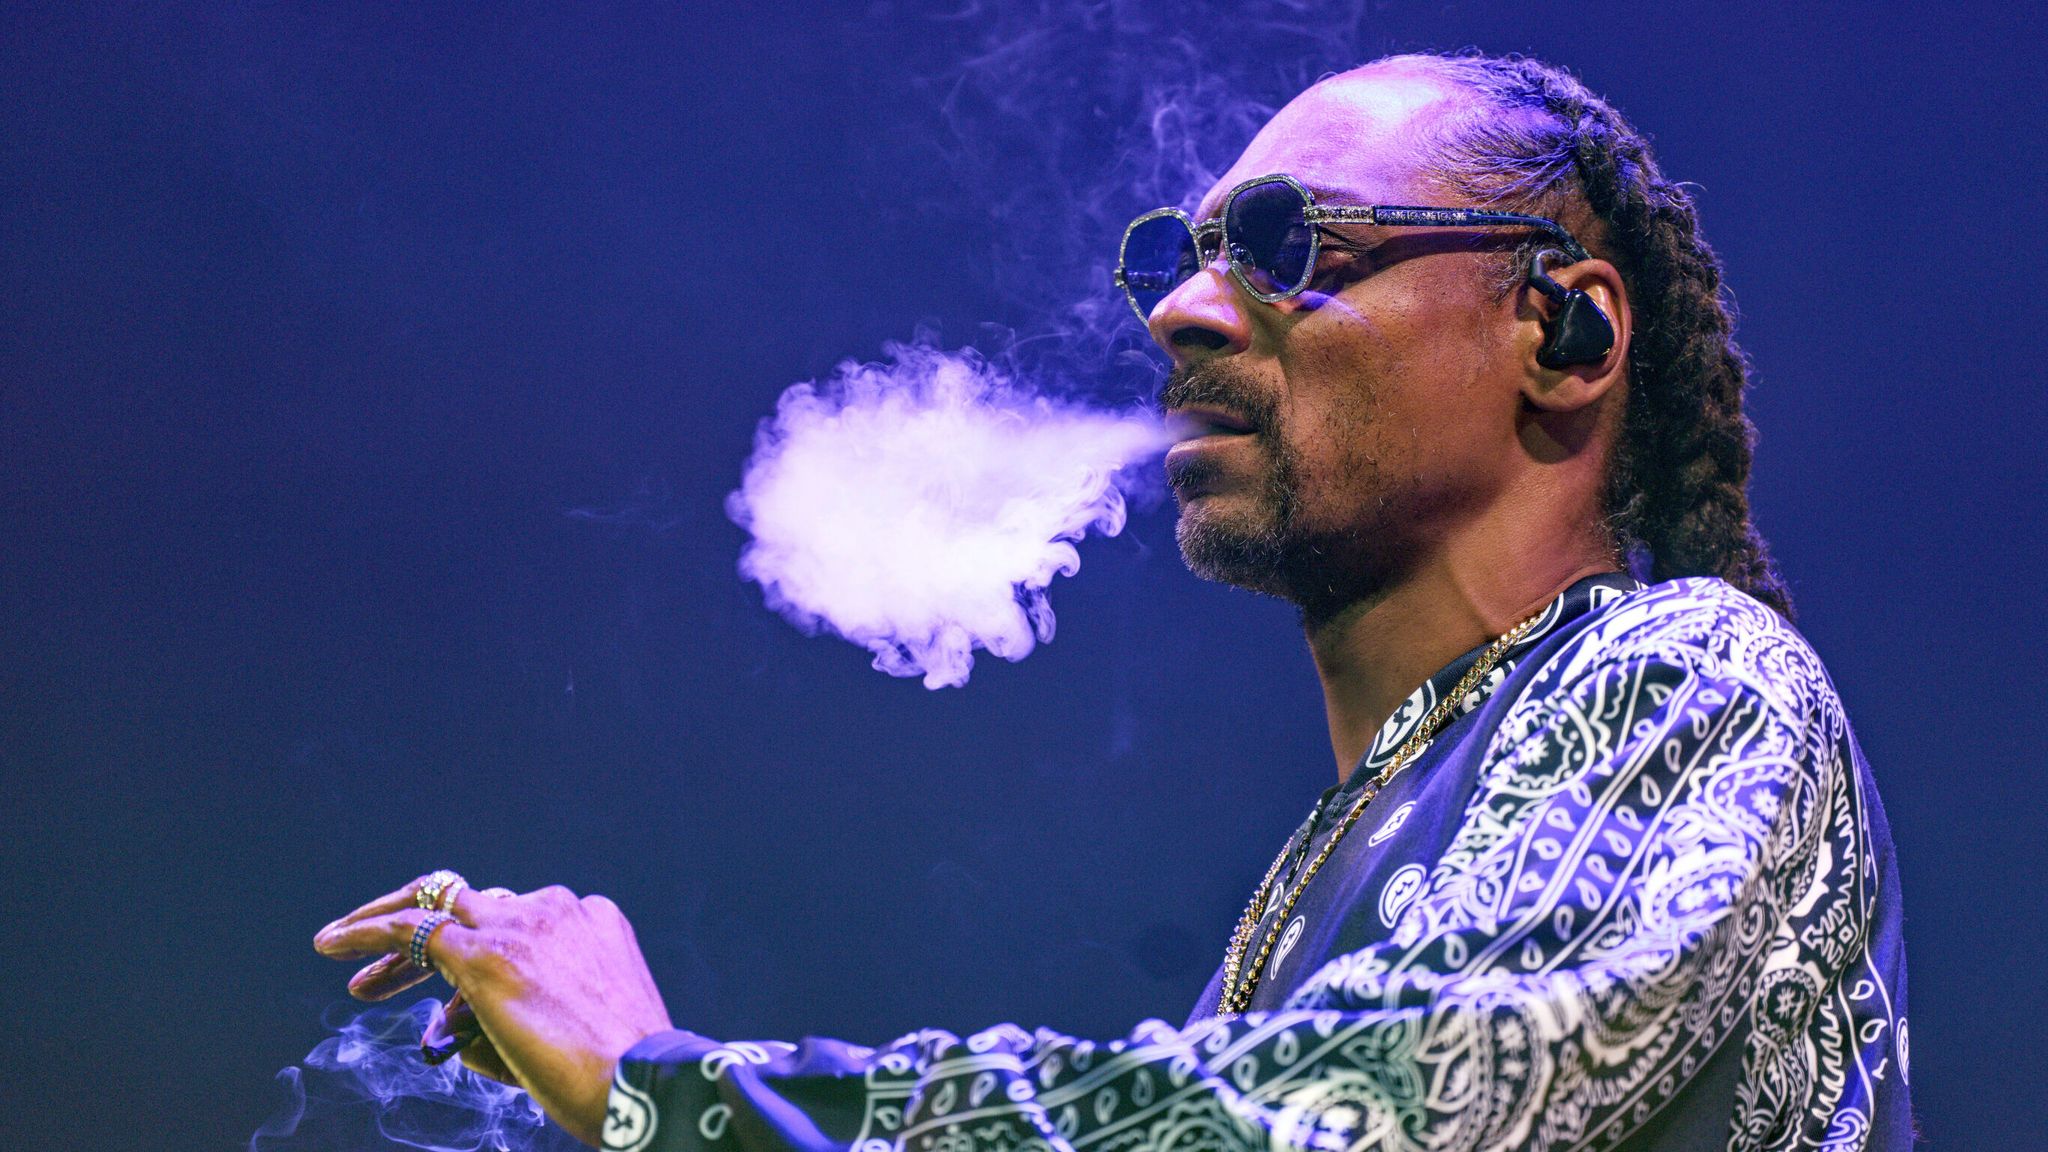 Rapper Snoop Dogg quits smoking after years of marijuana use, Ents & Arts  News